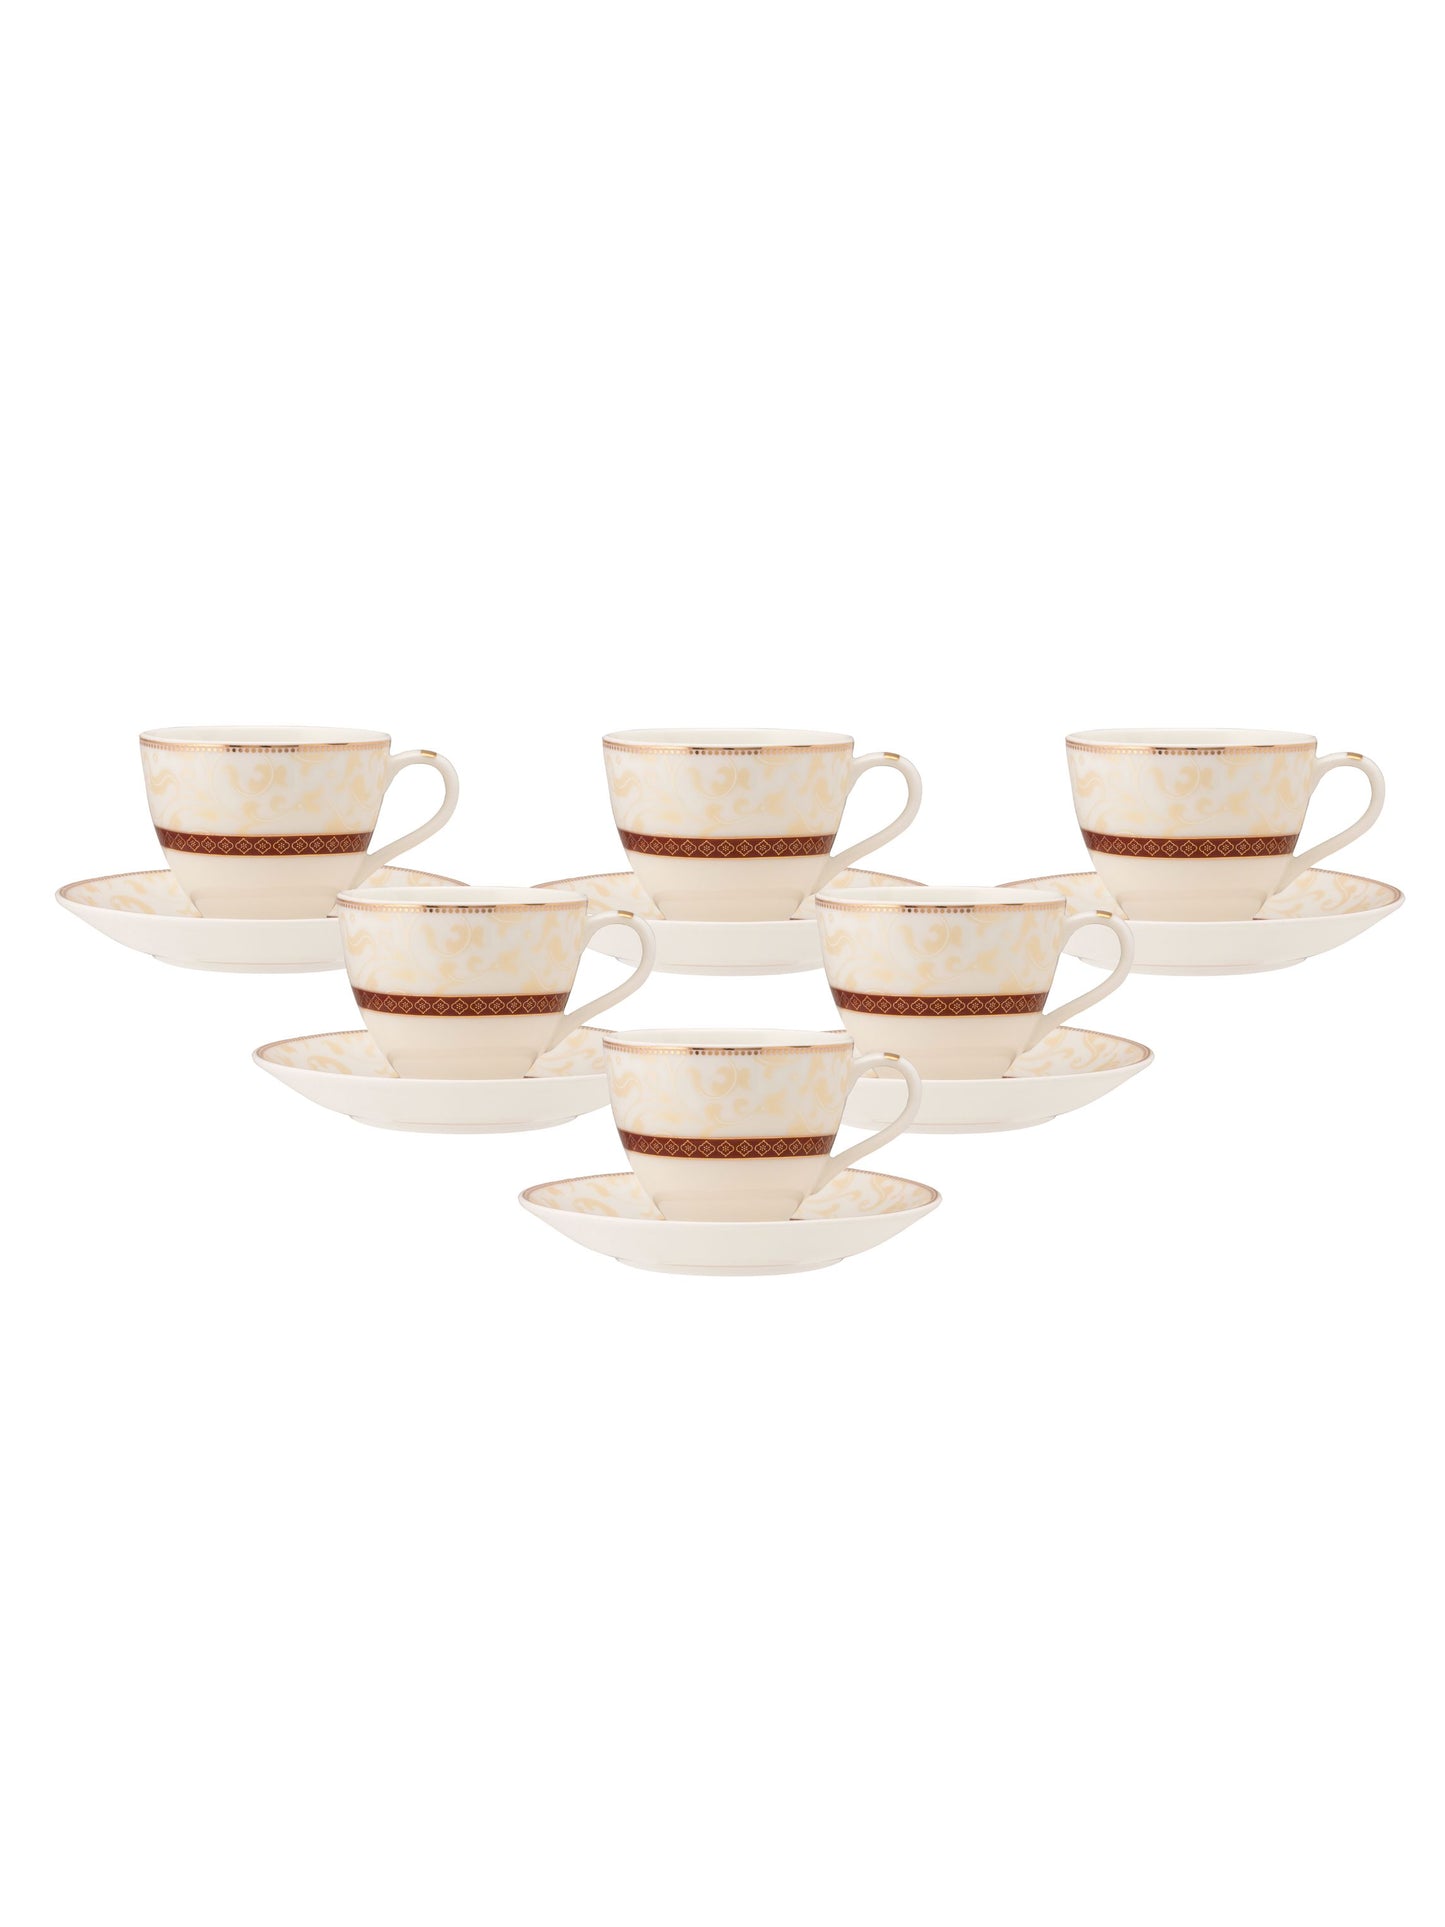 JCPL King Crysta Cup & Saucer, 160ml, Set of 12 (6 Cups + 6 Saucers) (CR403)